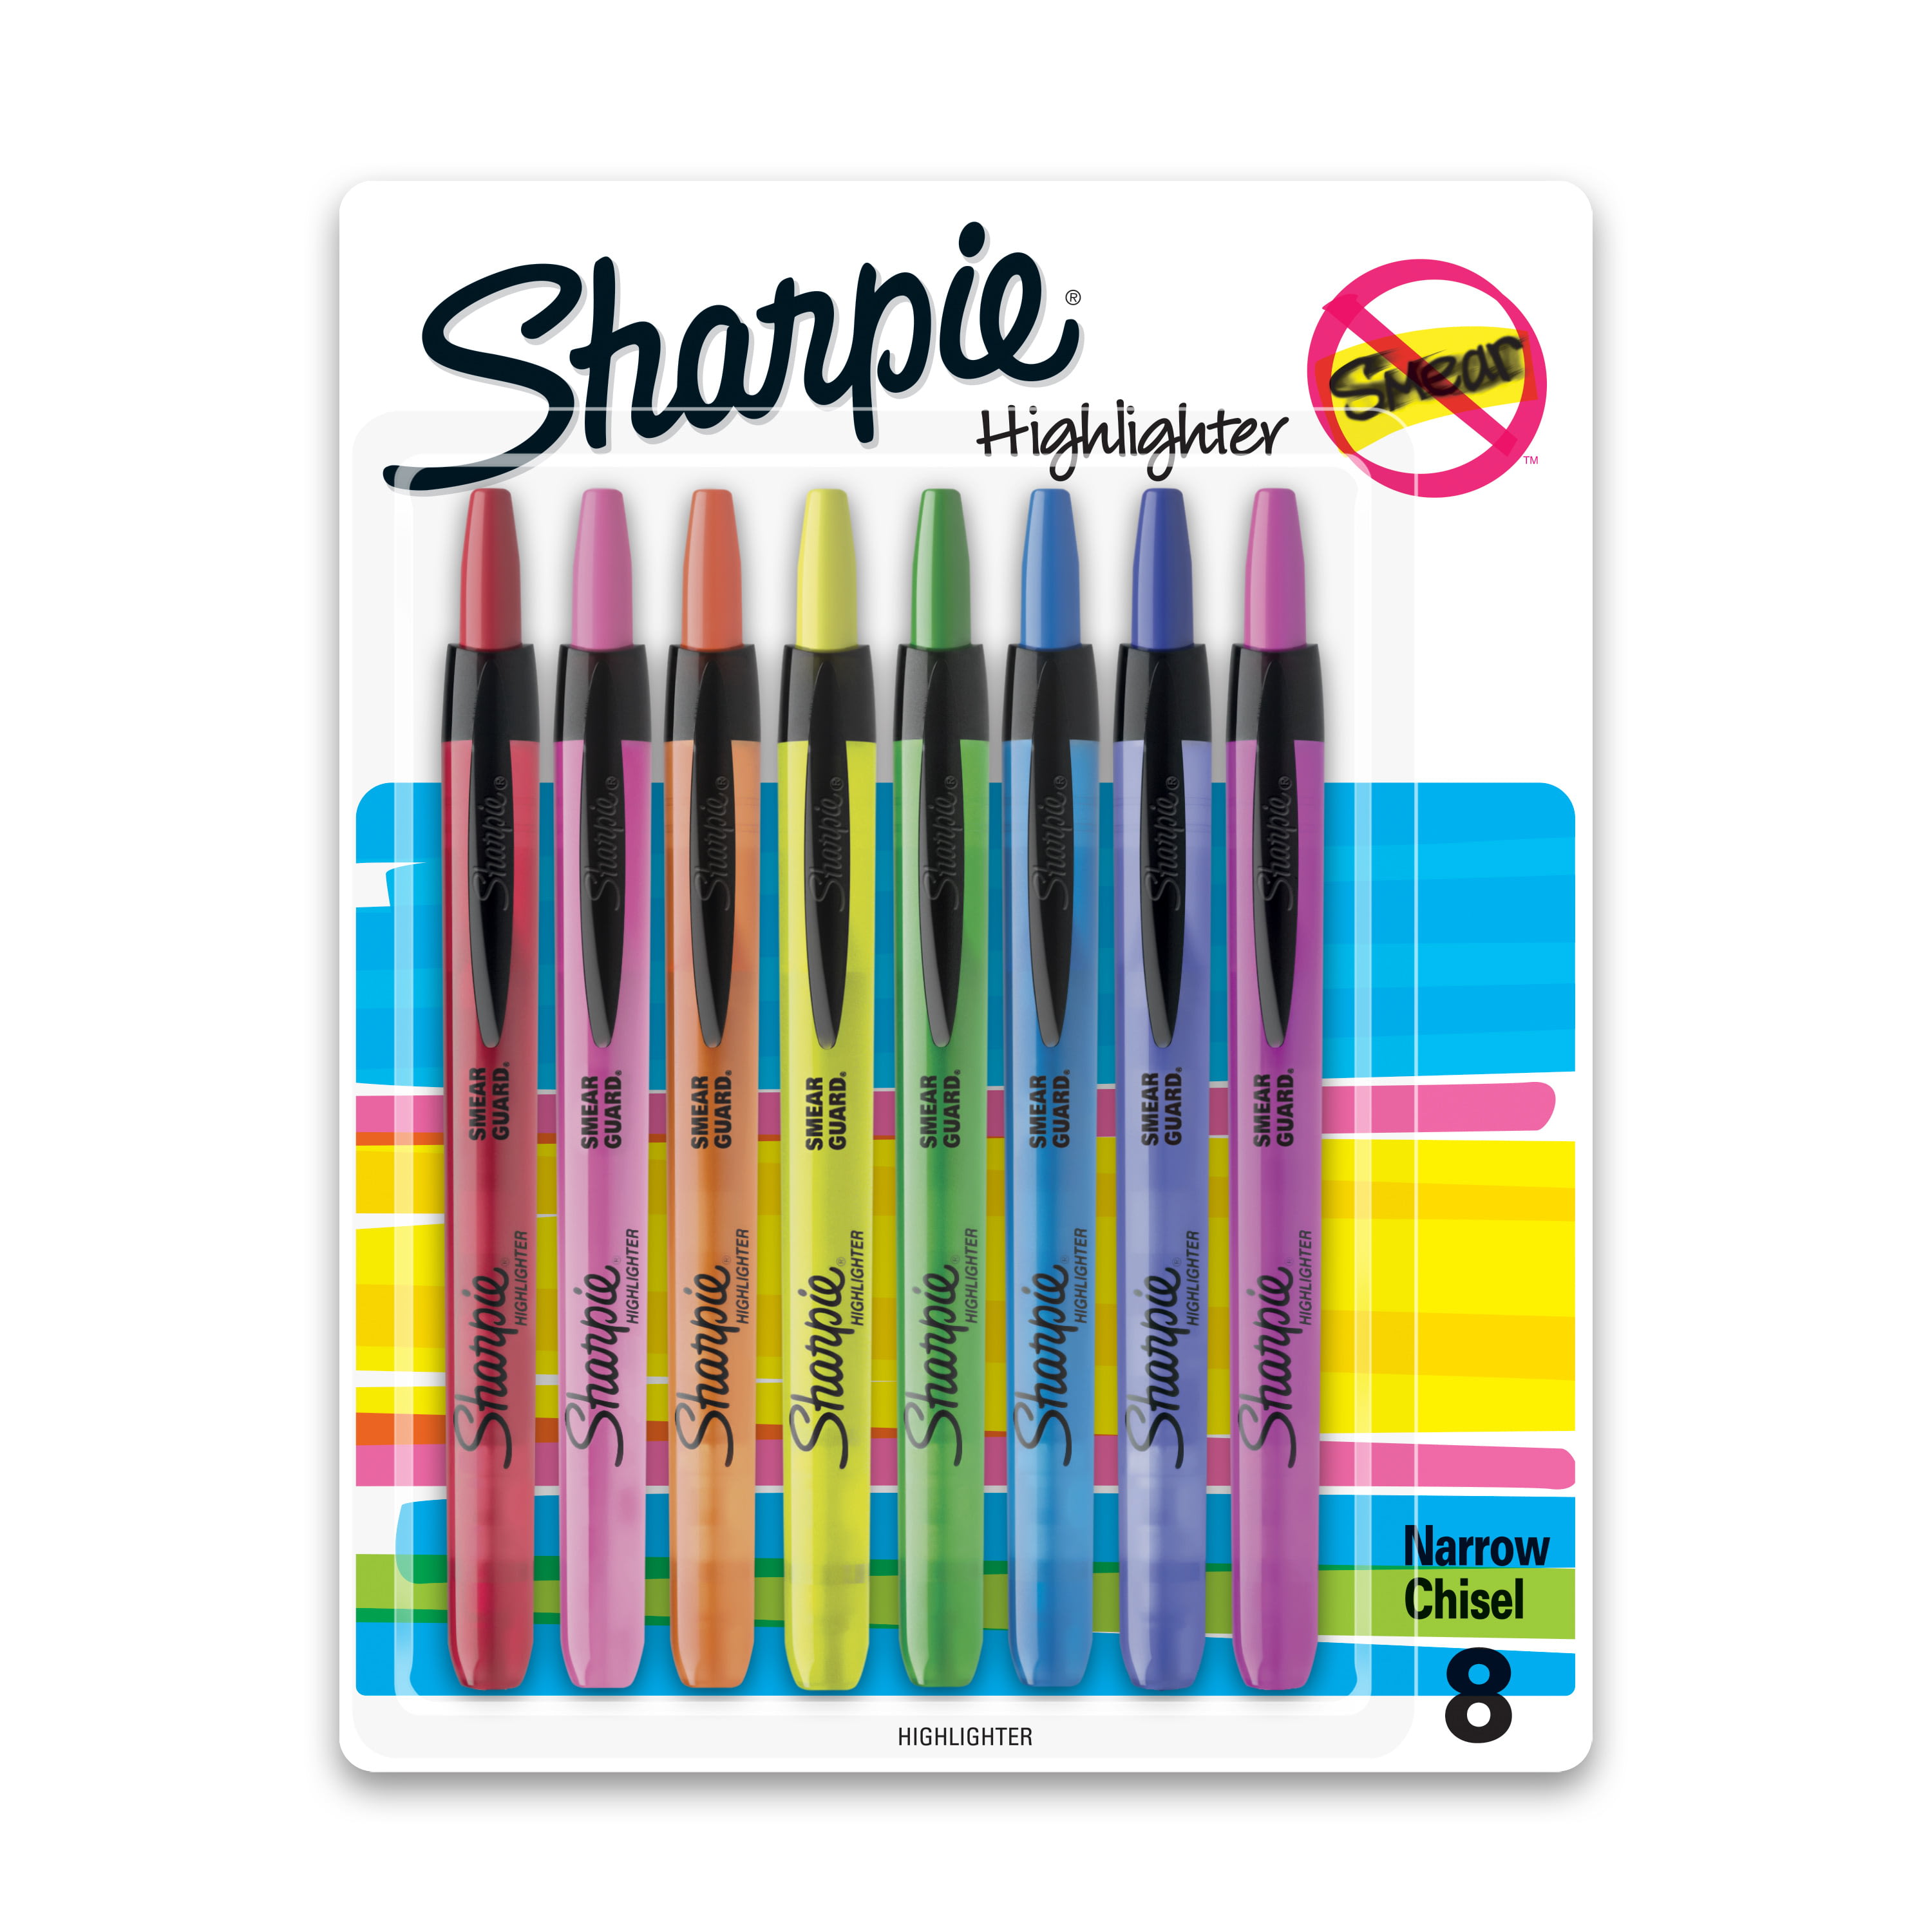 Color Sharpie Clear View Chisel Tip Highlighters, 4 Sharpie